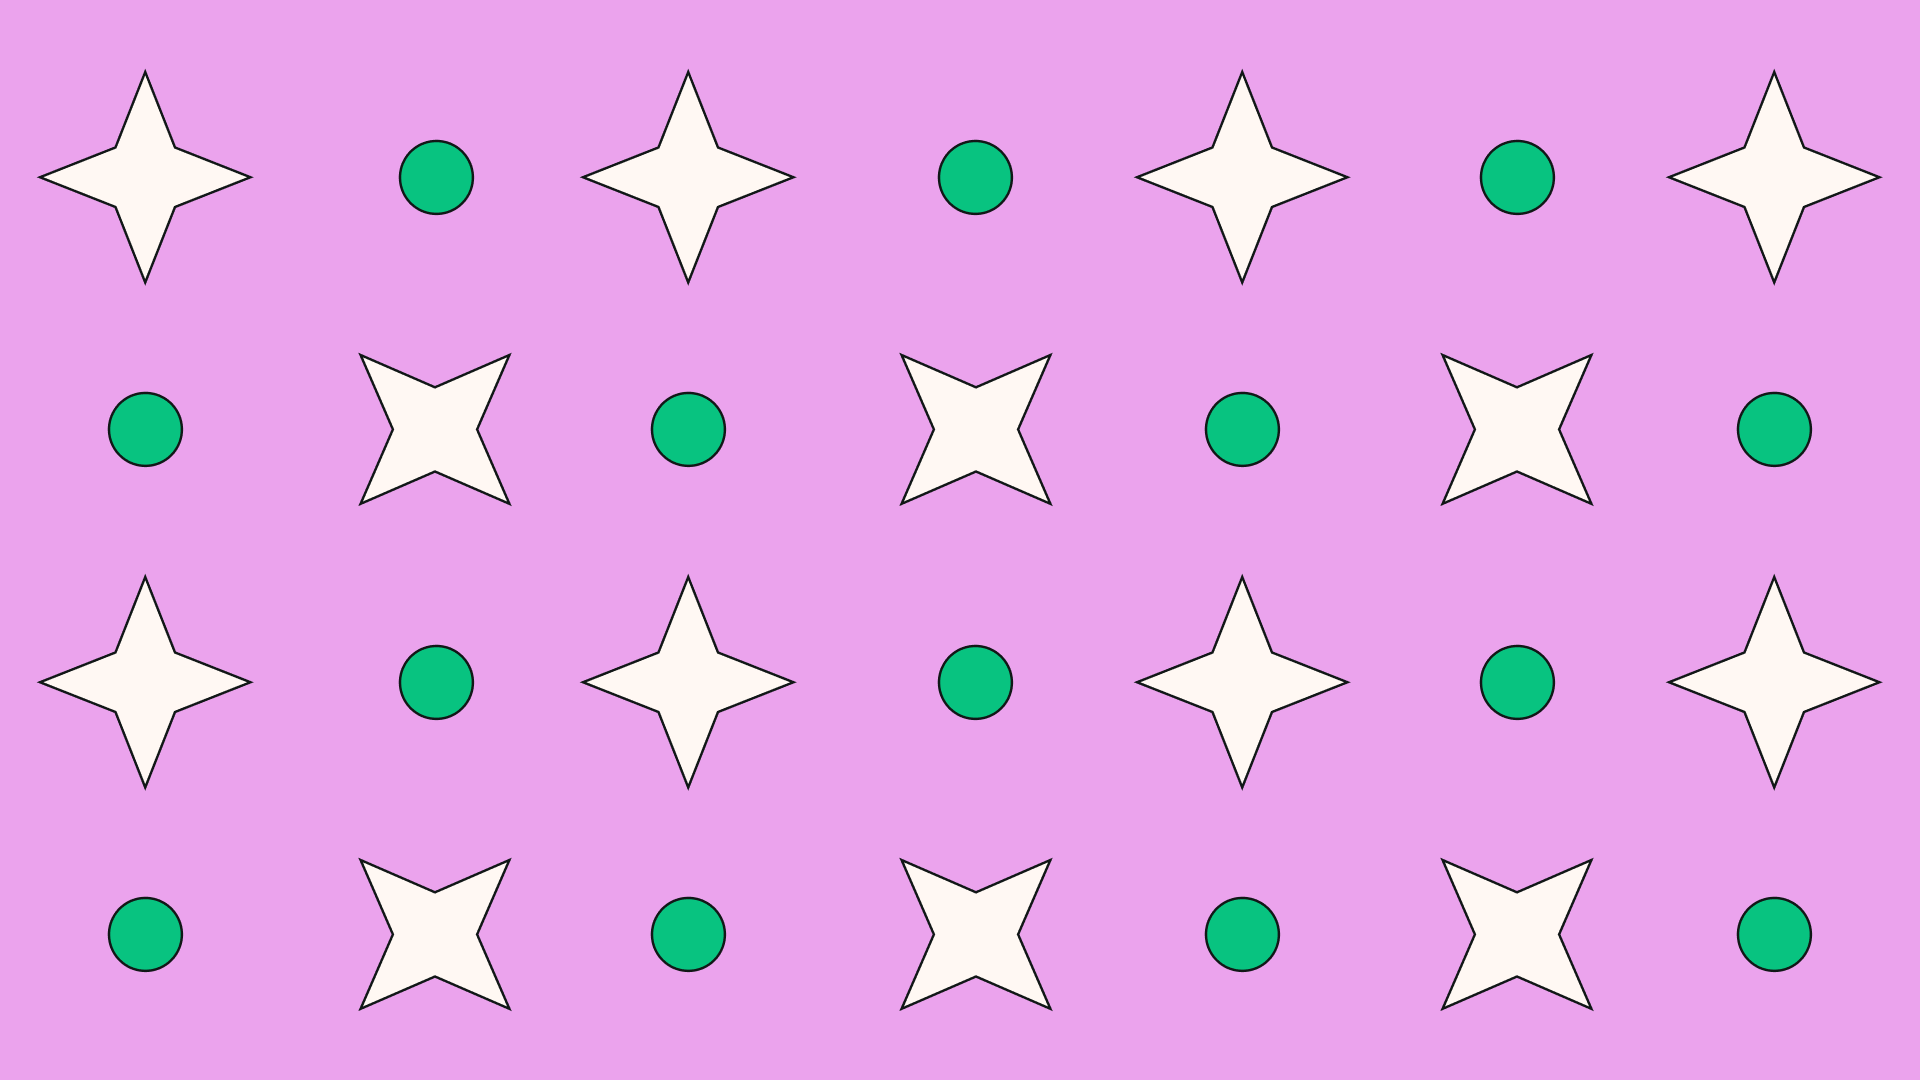 How to design a repeating pattern